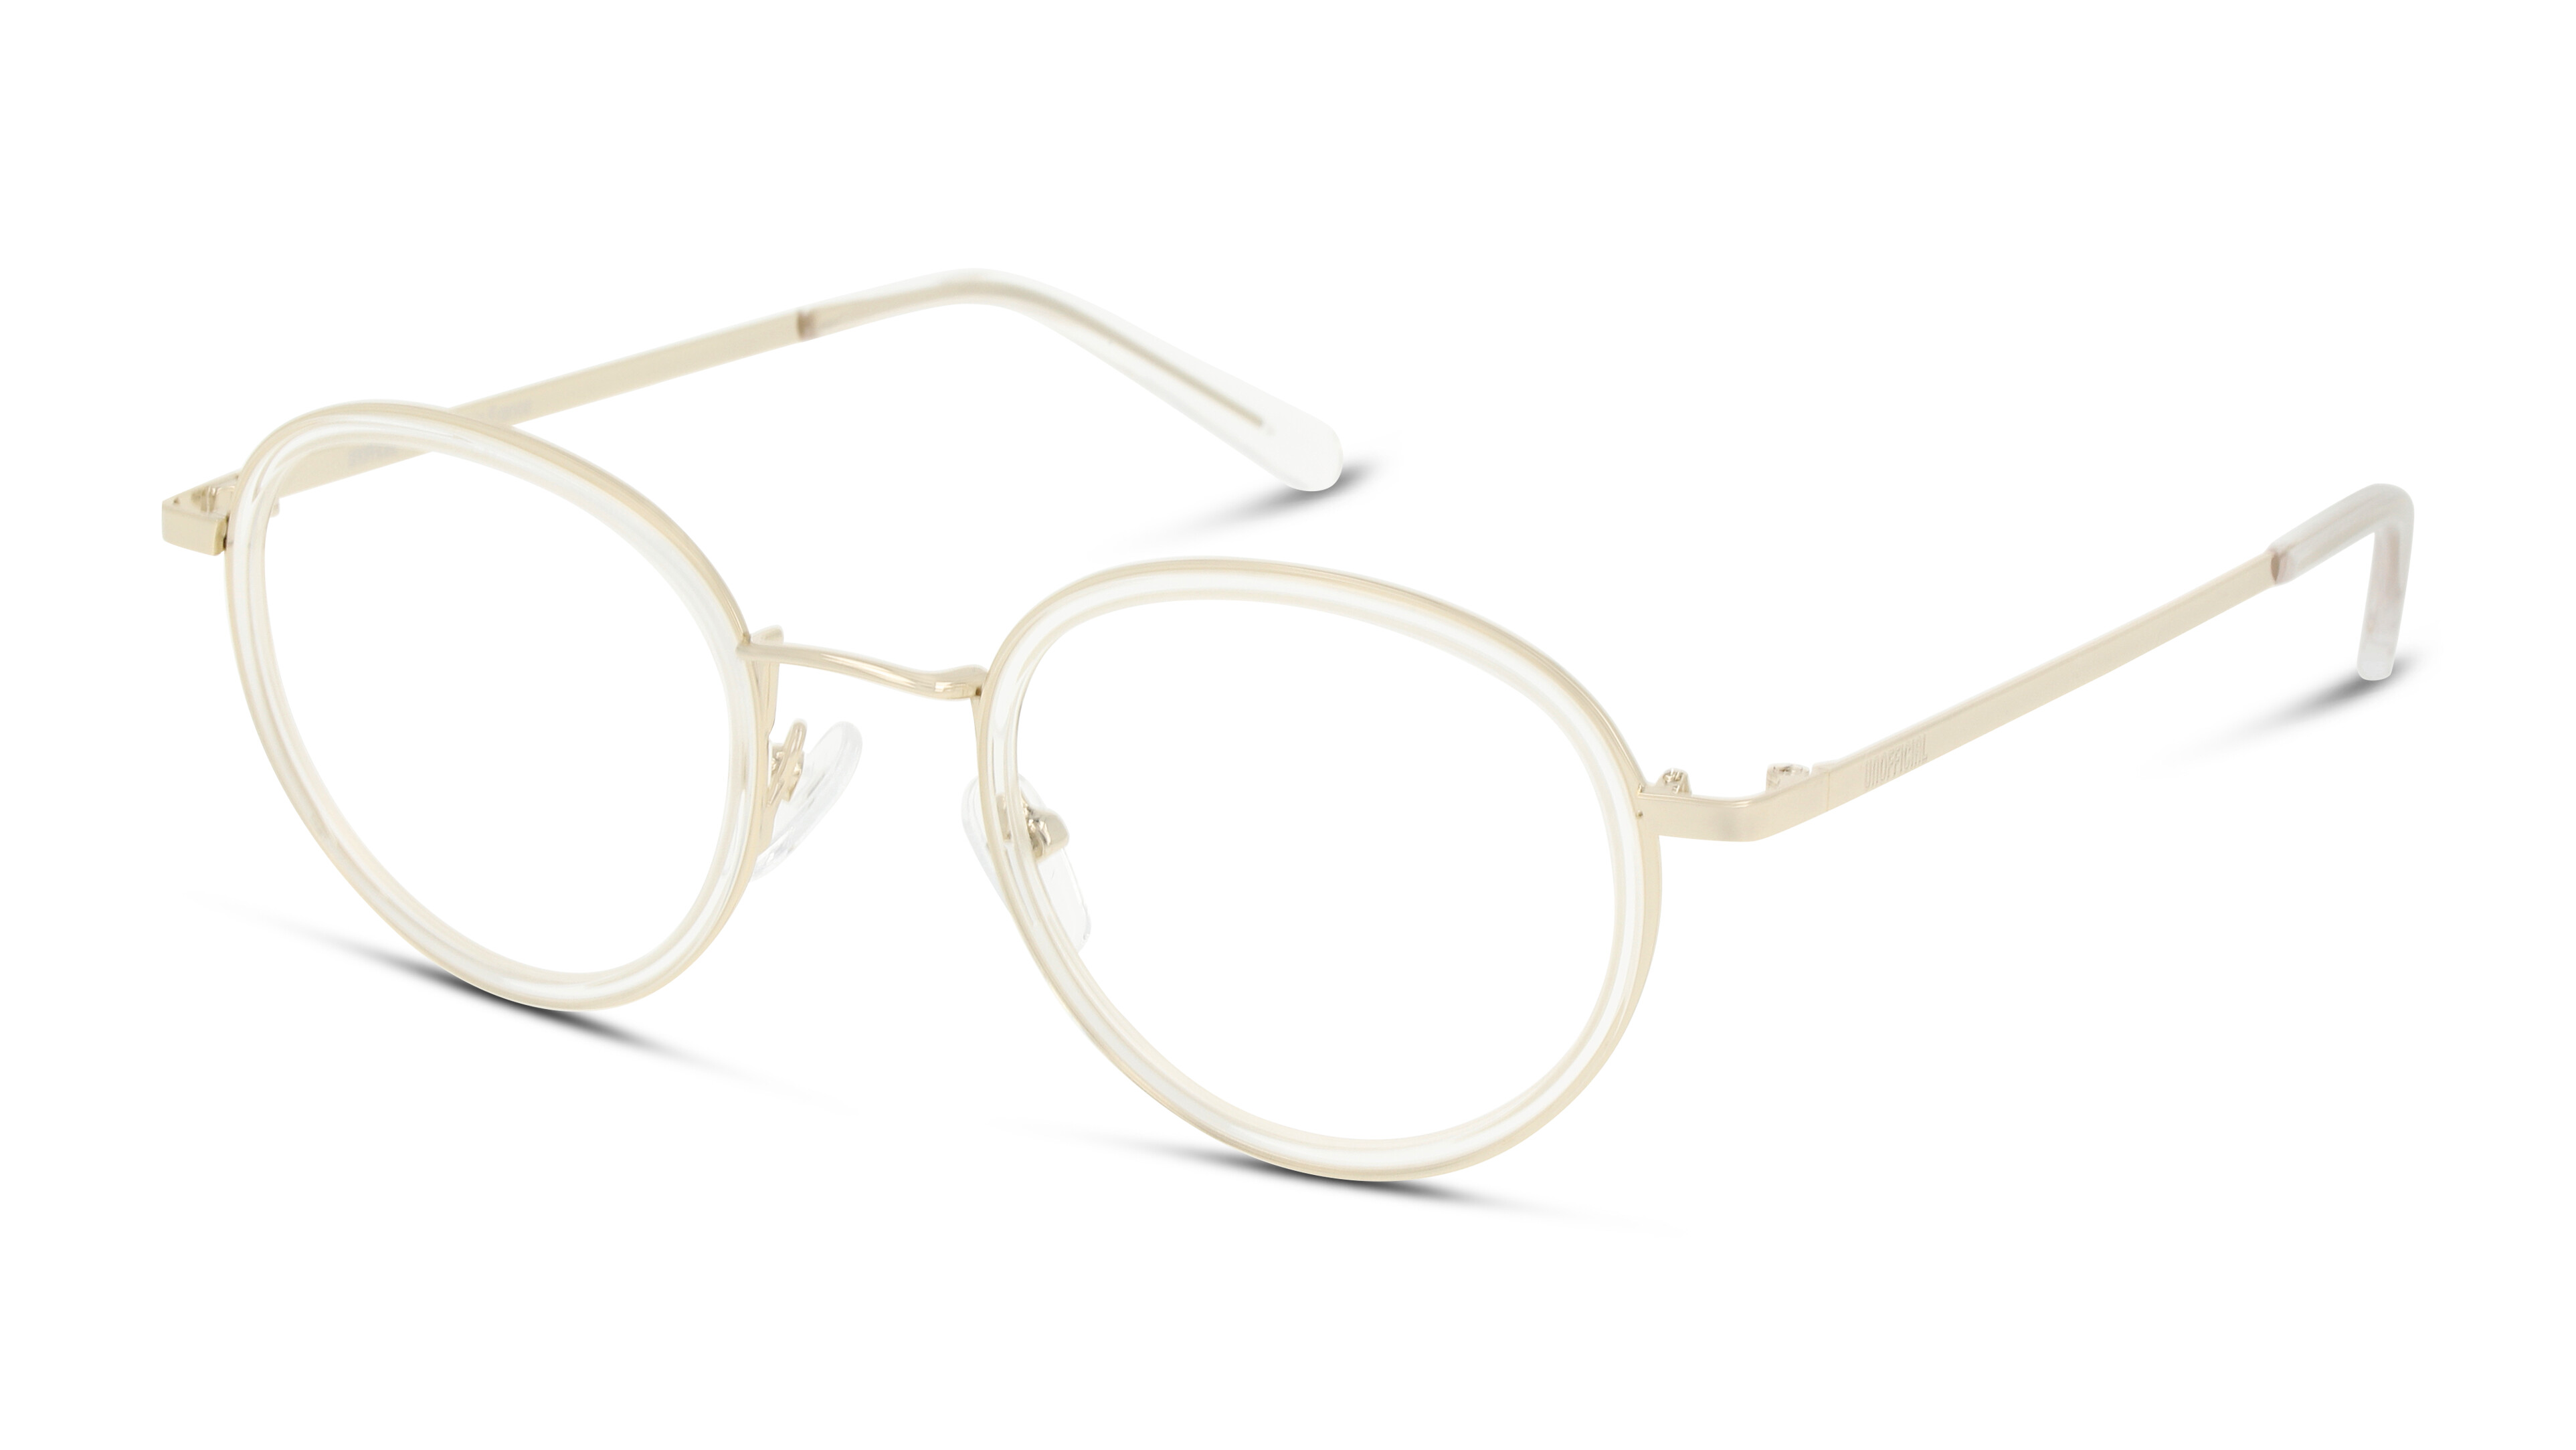 Angle_Left01 UNOFFICIAL UNOF0318 TD00 Brille Transparent, Goldfarben